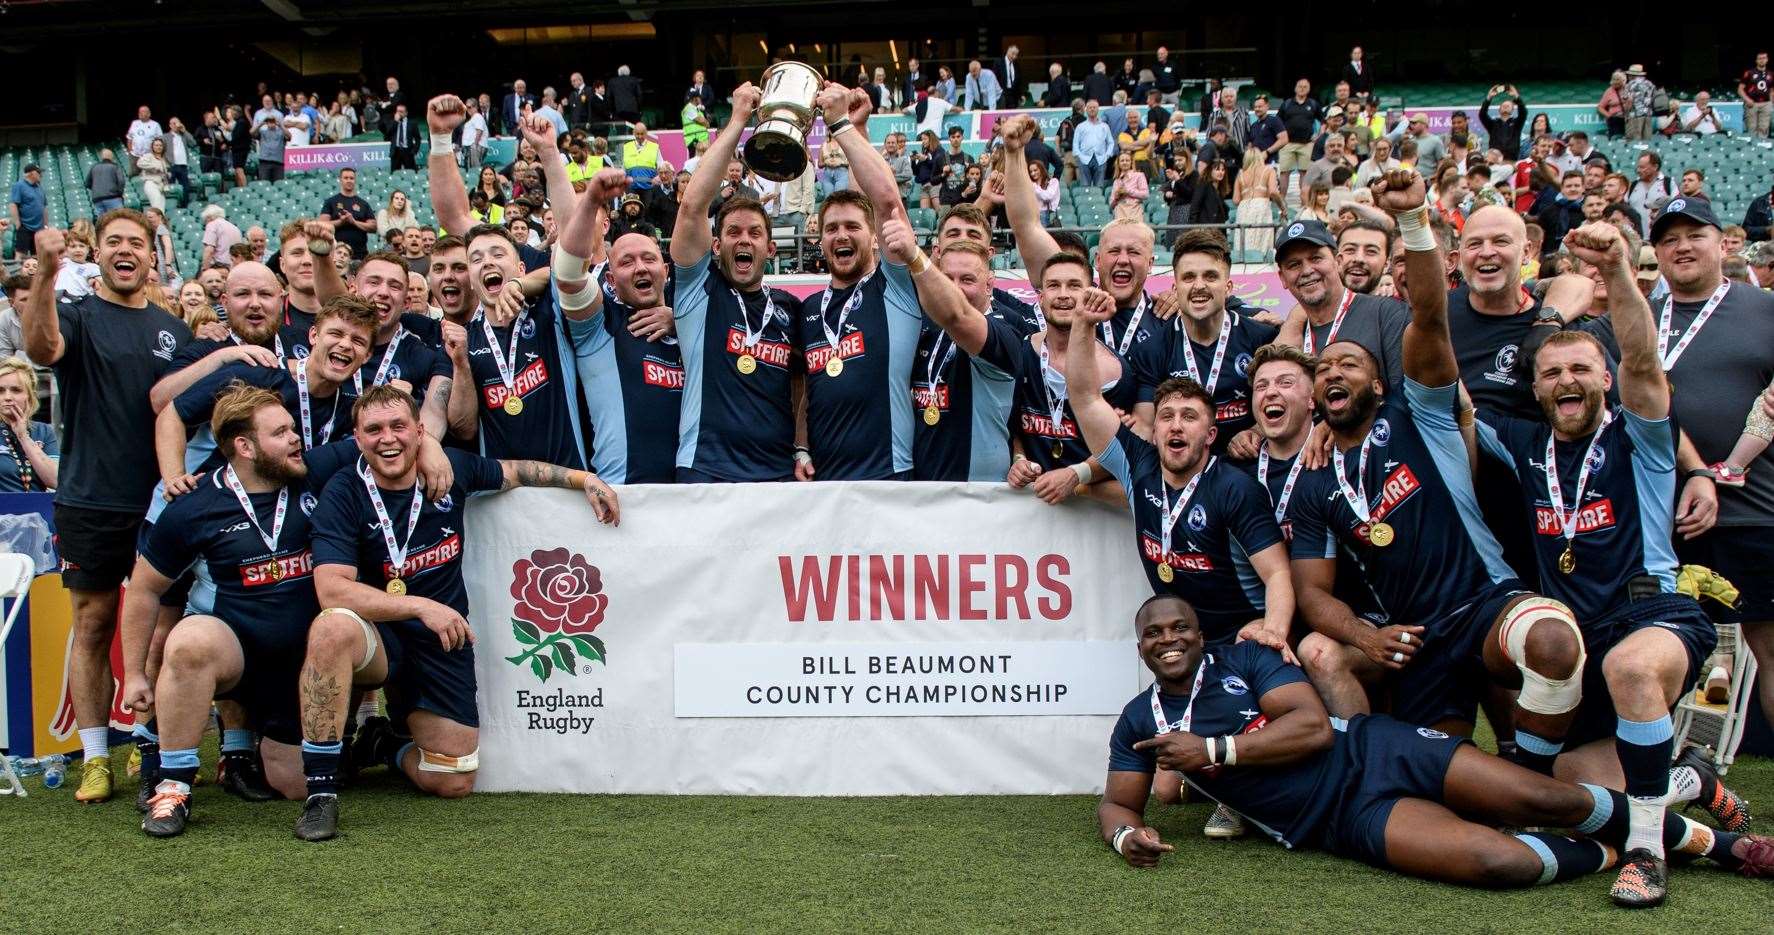 Kent celebrate their Bill Beaumont County Championship Final win over Lancashire at Twickenham. Picture: ICPhoto